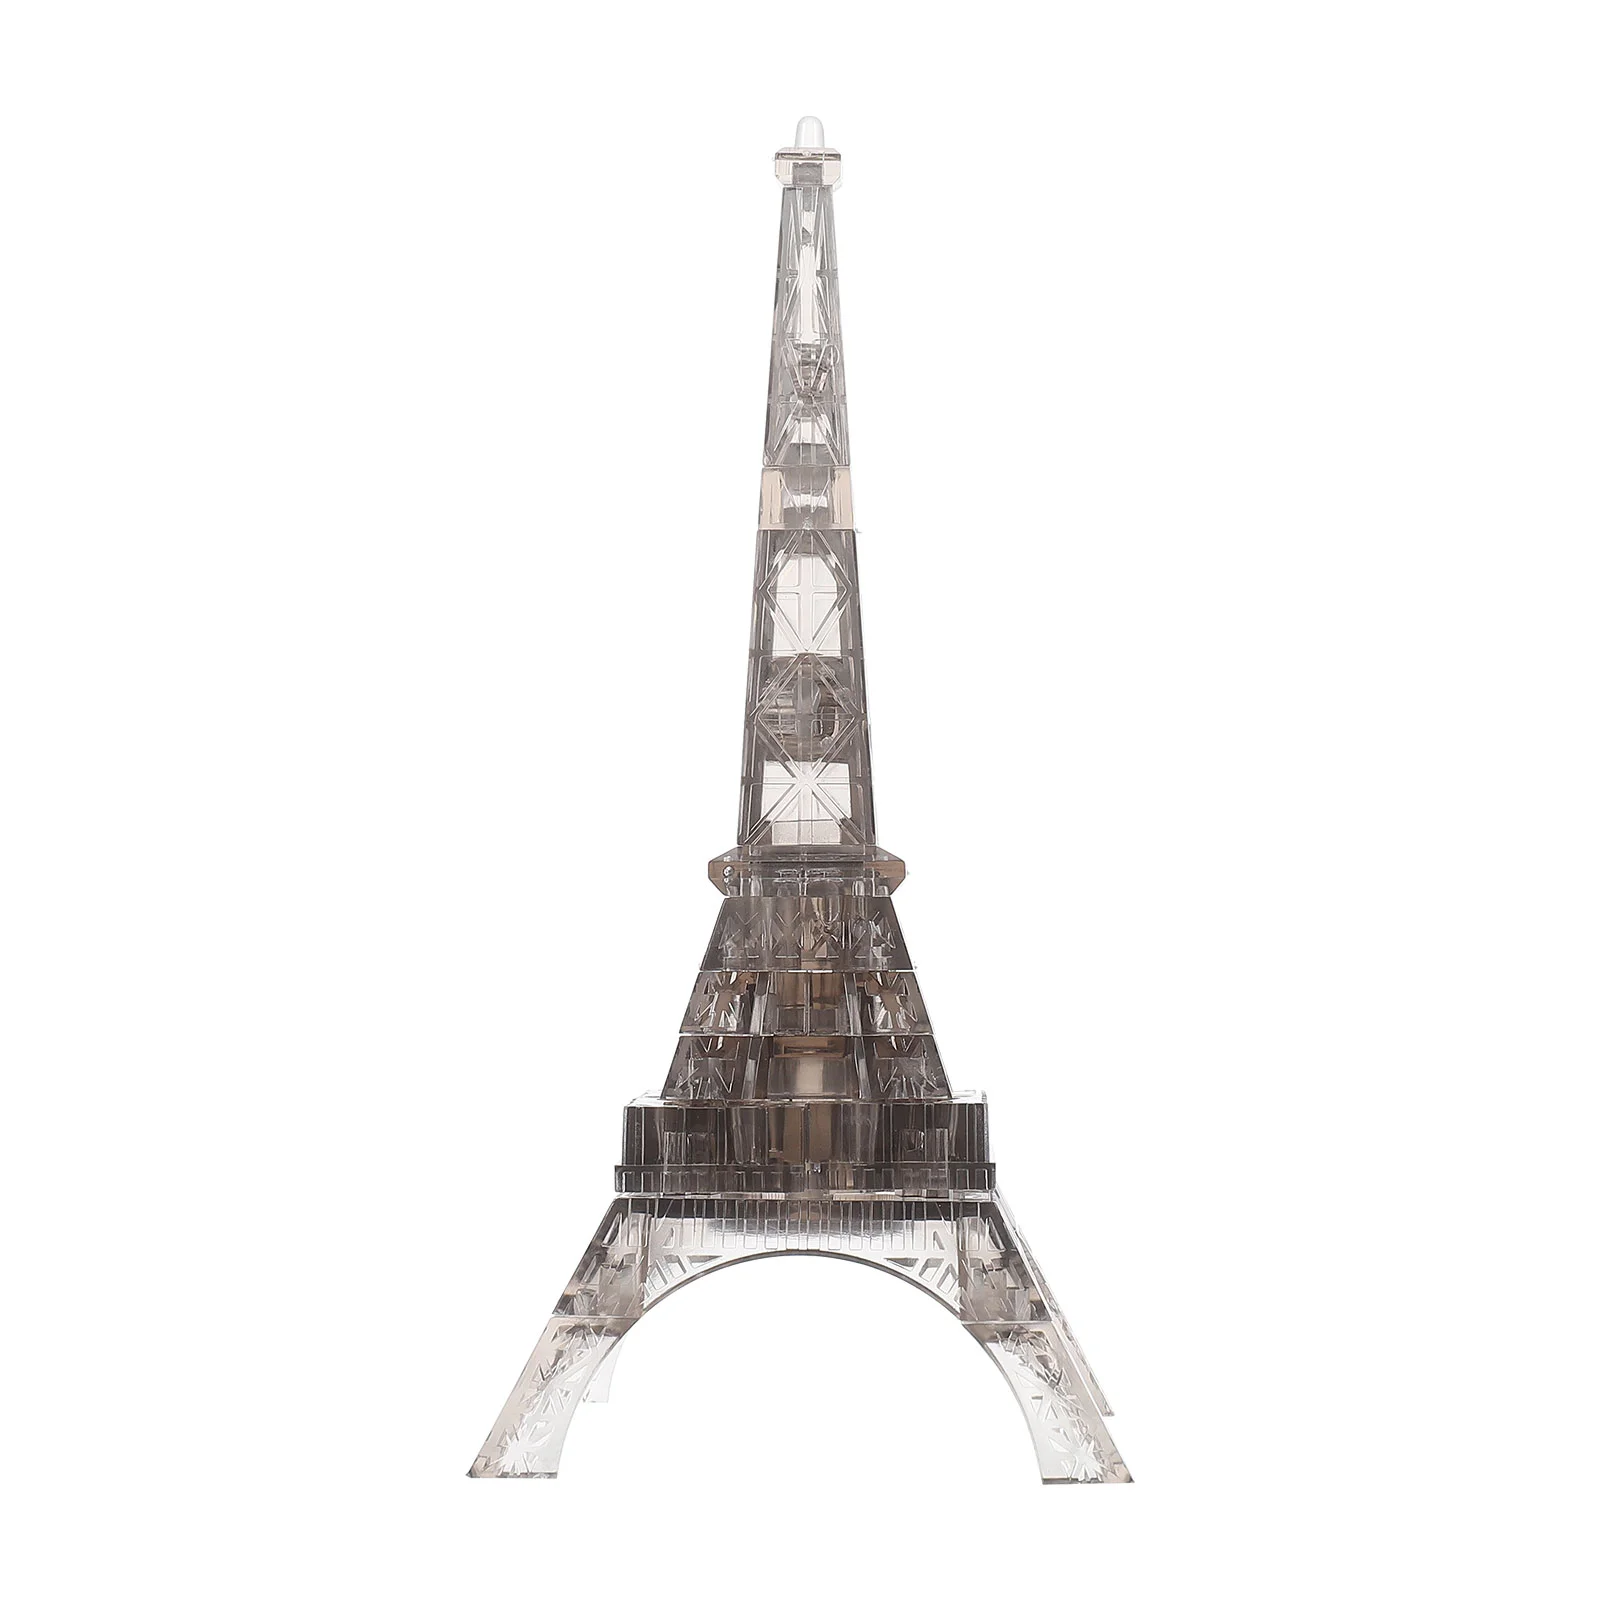 3D Transparent Eiffel Tower Puzzle Crystal Jigsaw Pieces Building Blocks Brain Teaser Educational Early Learning, Grey